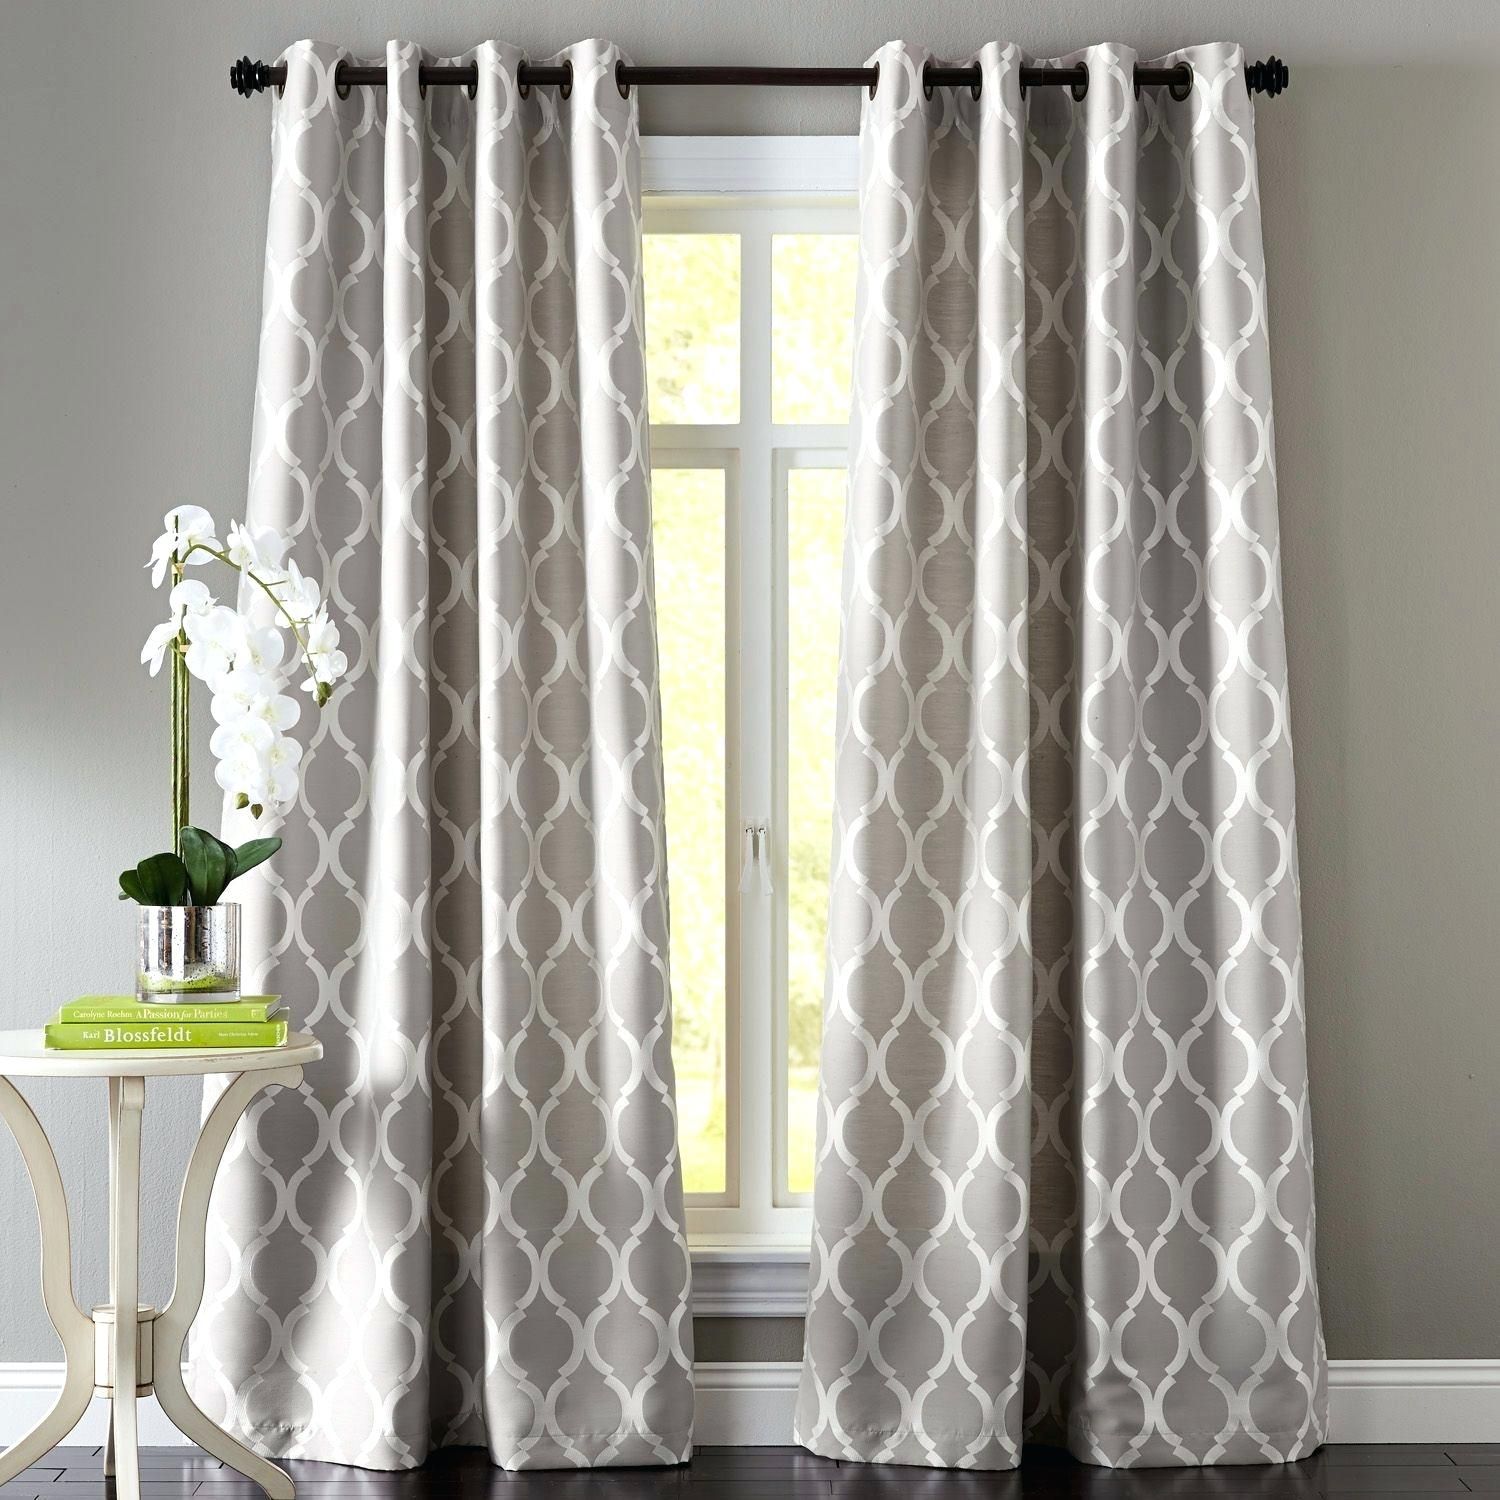 Grey Grommet Curtains Home Oxford Sateen Woven Blackout Top With Woven Blackout Curtain Panel Pairs With Grommet Top (View 27 of 30)